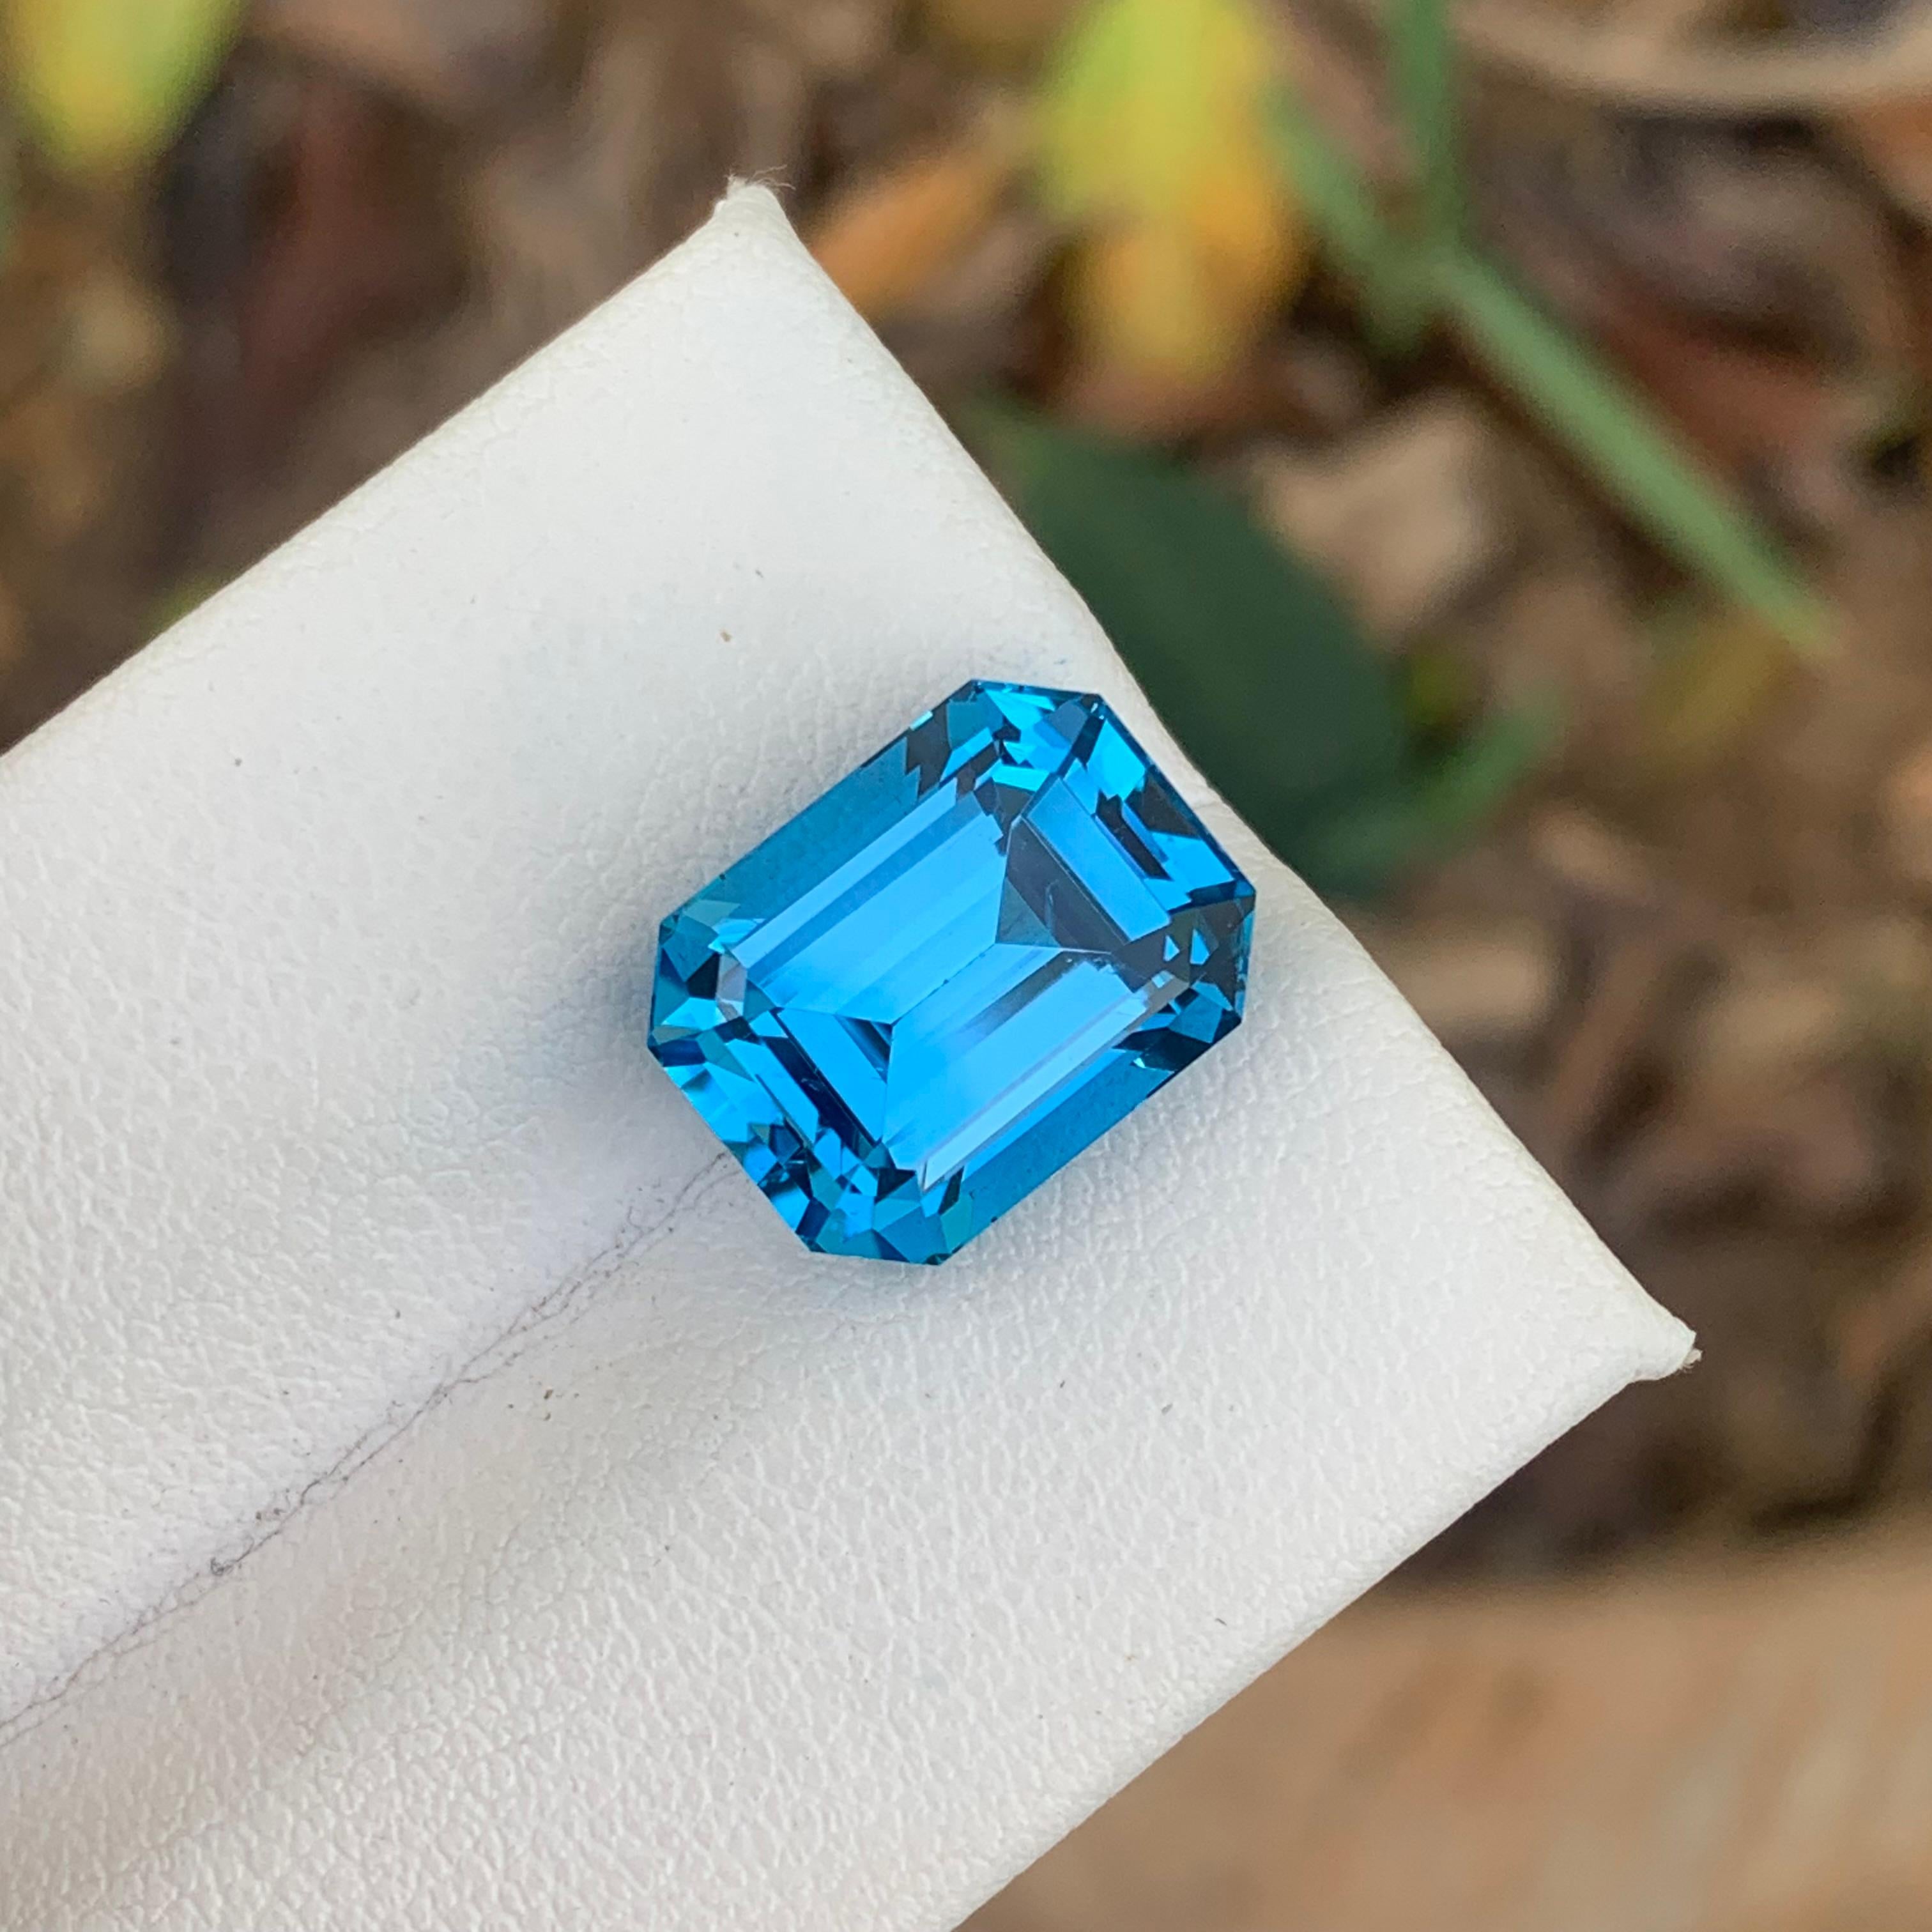 Gorgeous Intense Blue Loose Electric Blue Topaz from Brazil 9.85 Carat Ring Gem For Sale 4